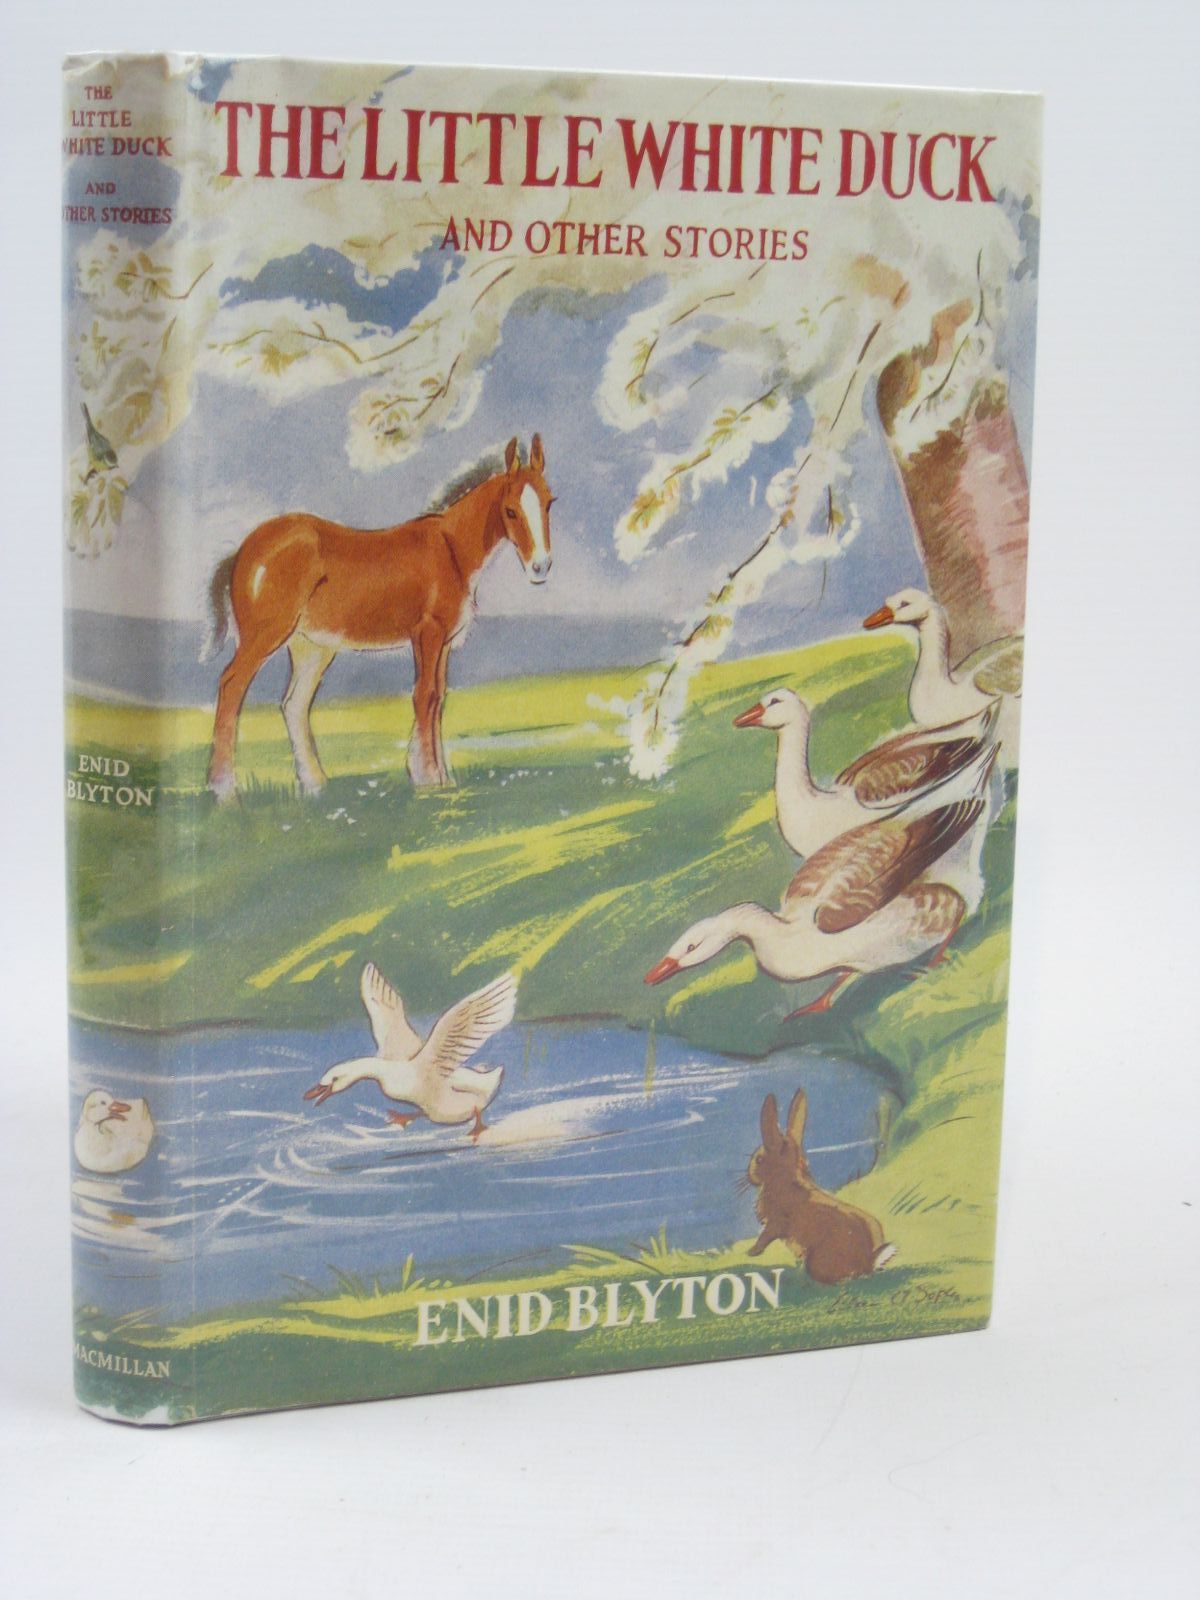 Cover of THE LITTLE WHITE DUCK AND OTHER STORIES by Enid Blyton